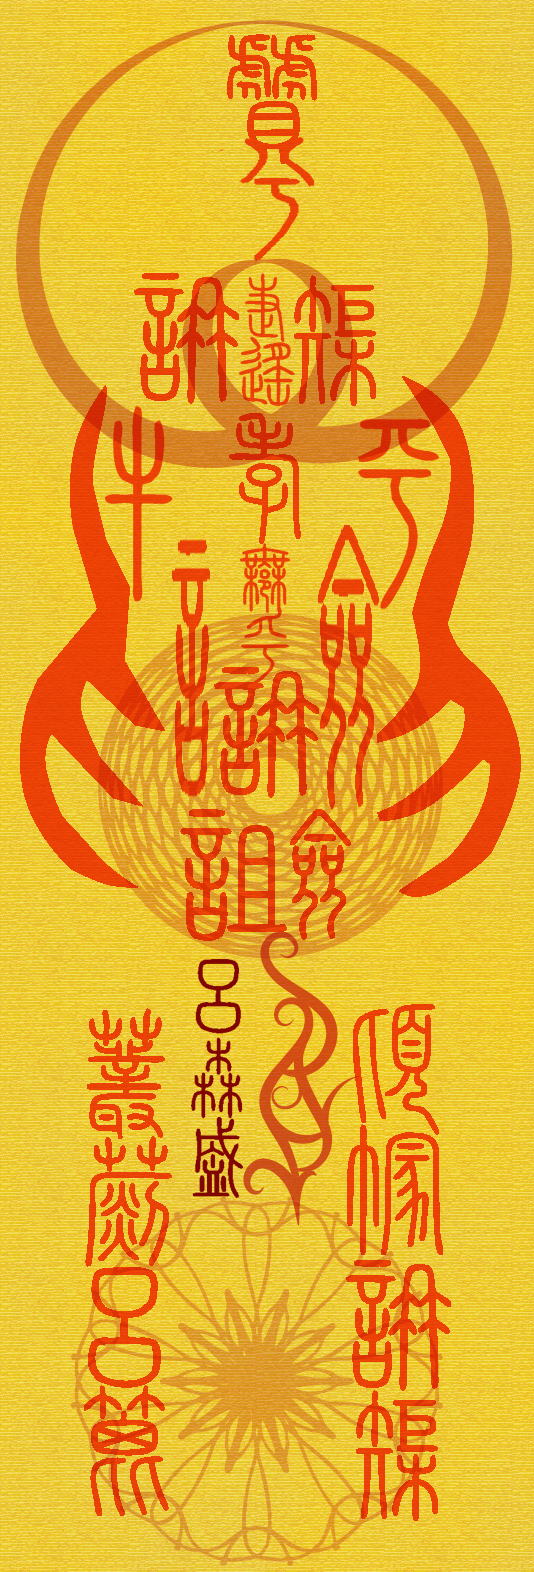 A deep goldenrod talisman textured paper with pale stamps in the background, bright cinnabar red seal script characters and a darker, blood red series of characters in the middle. The top stamped symbol is a large circle with a twisted loop at the bottom which encloses some of the written text. The middle stamped symbol looks like a donut made of mesh. The bottom is an intricate mandala with a thin outer detail connected to an inner sunburst.